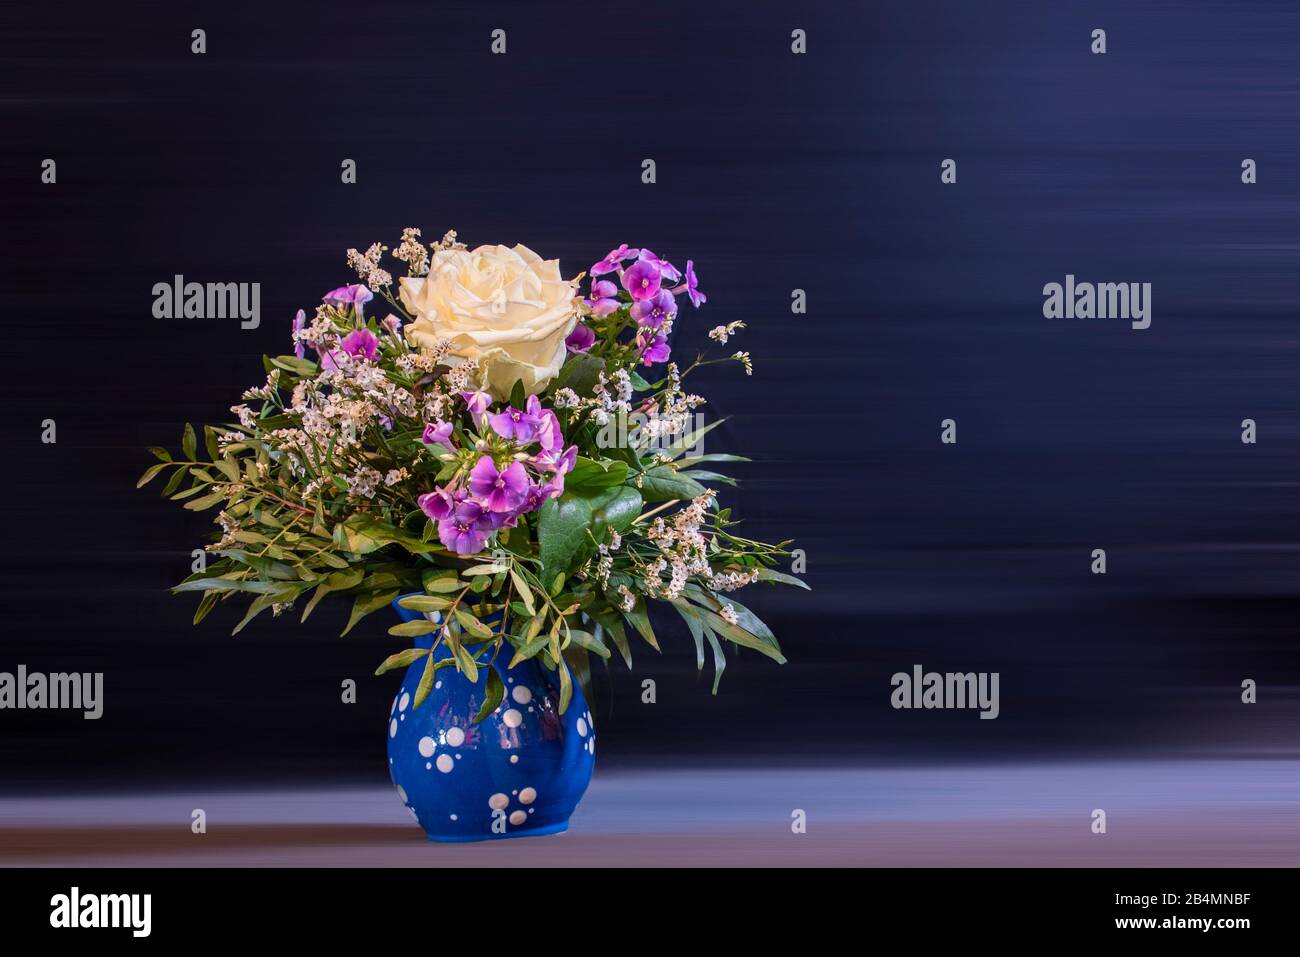 A festive bouquet of flowers stands in a blue vase with white dots. Stock Photo